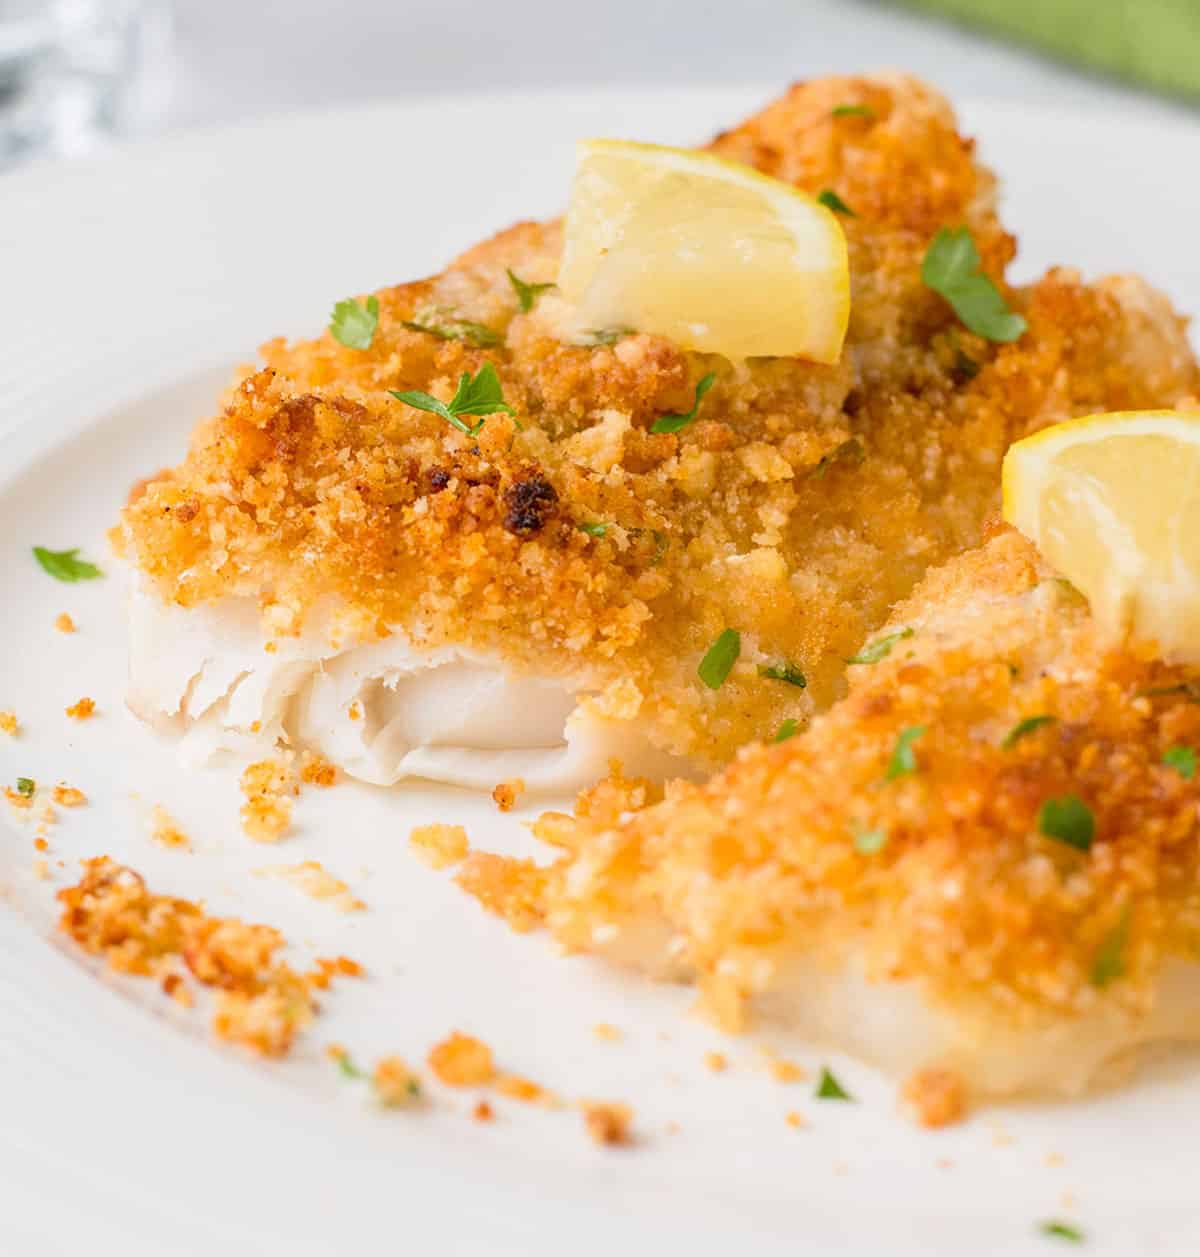 cod with bread crumb topping on plate with lemon wedges